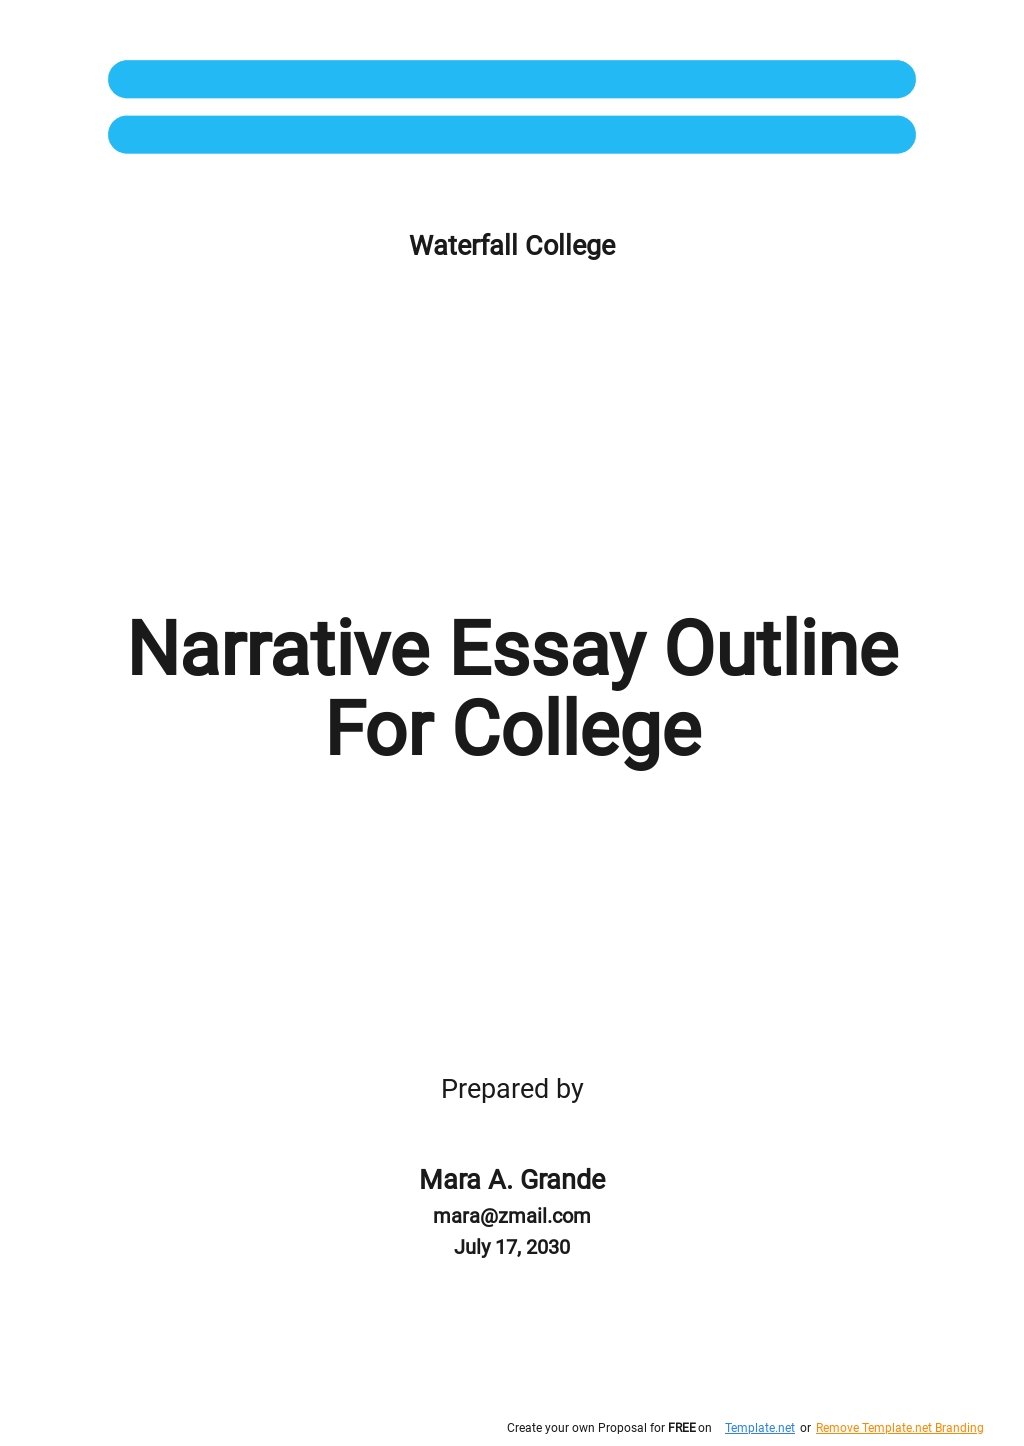 Narrative Essay Outline For College Template in Word, Google Docs, Apple Pages